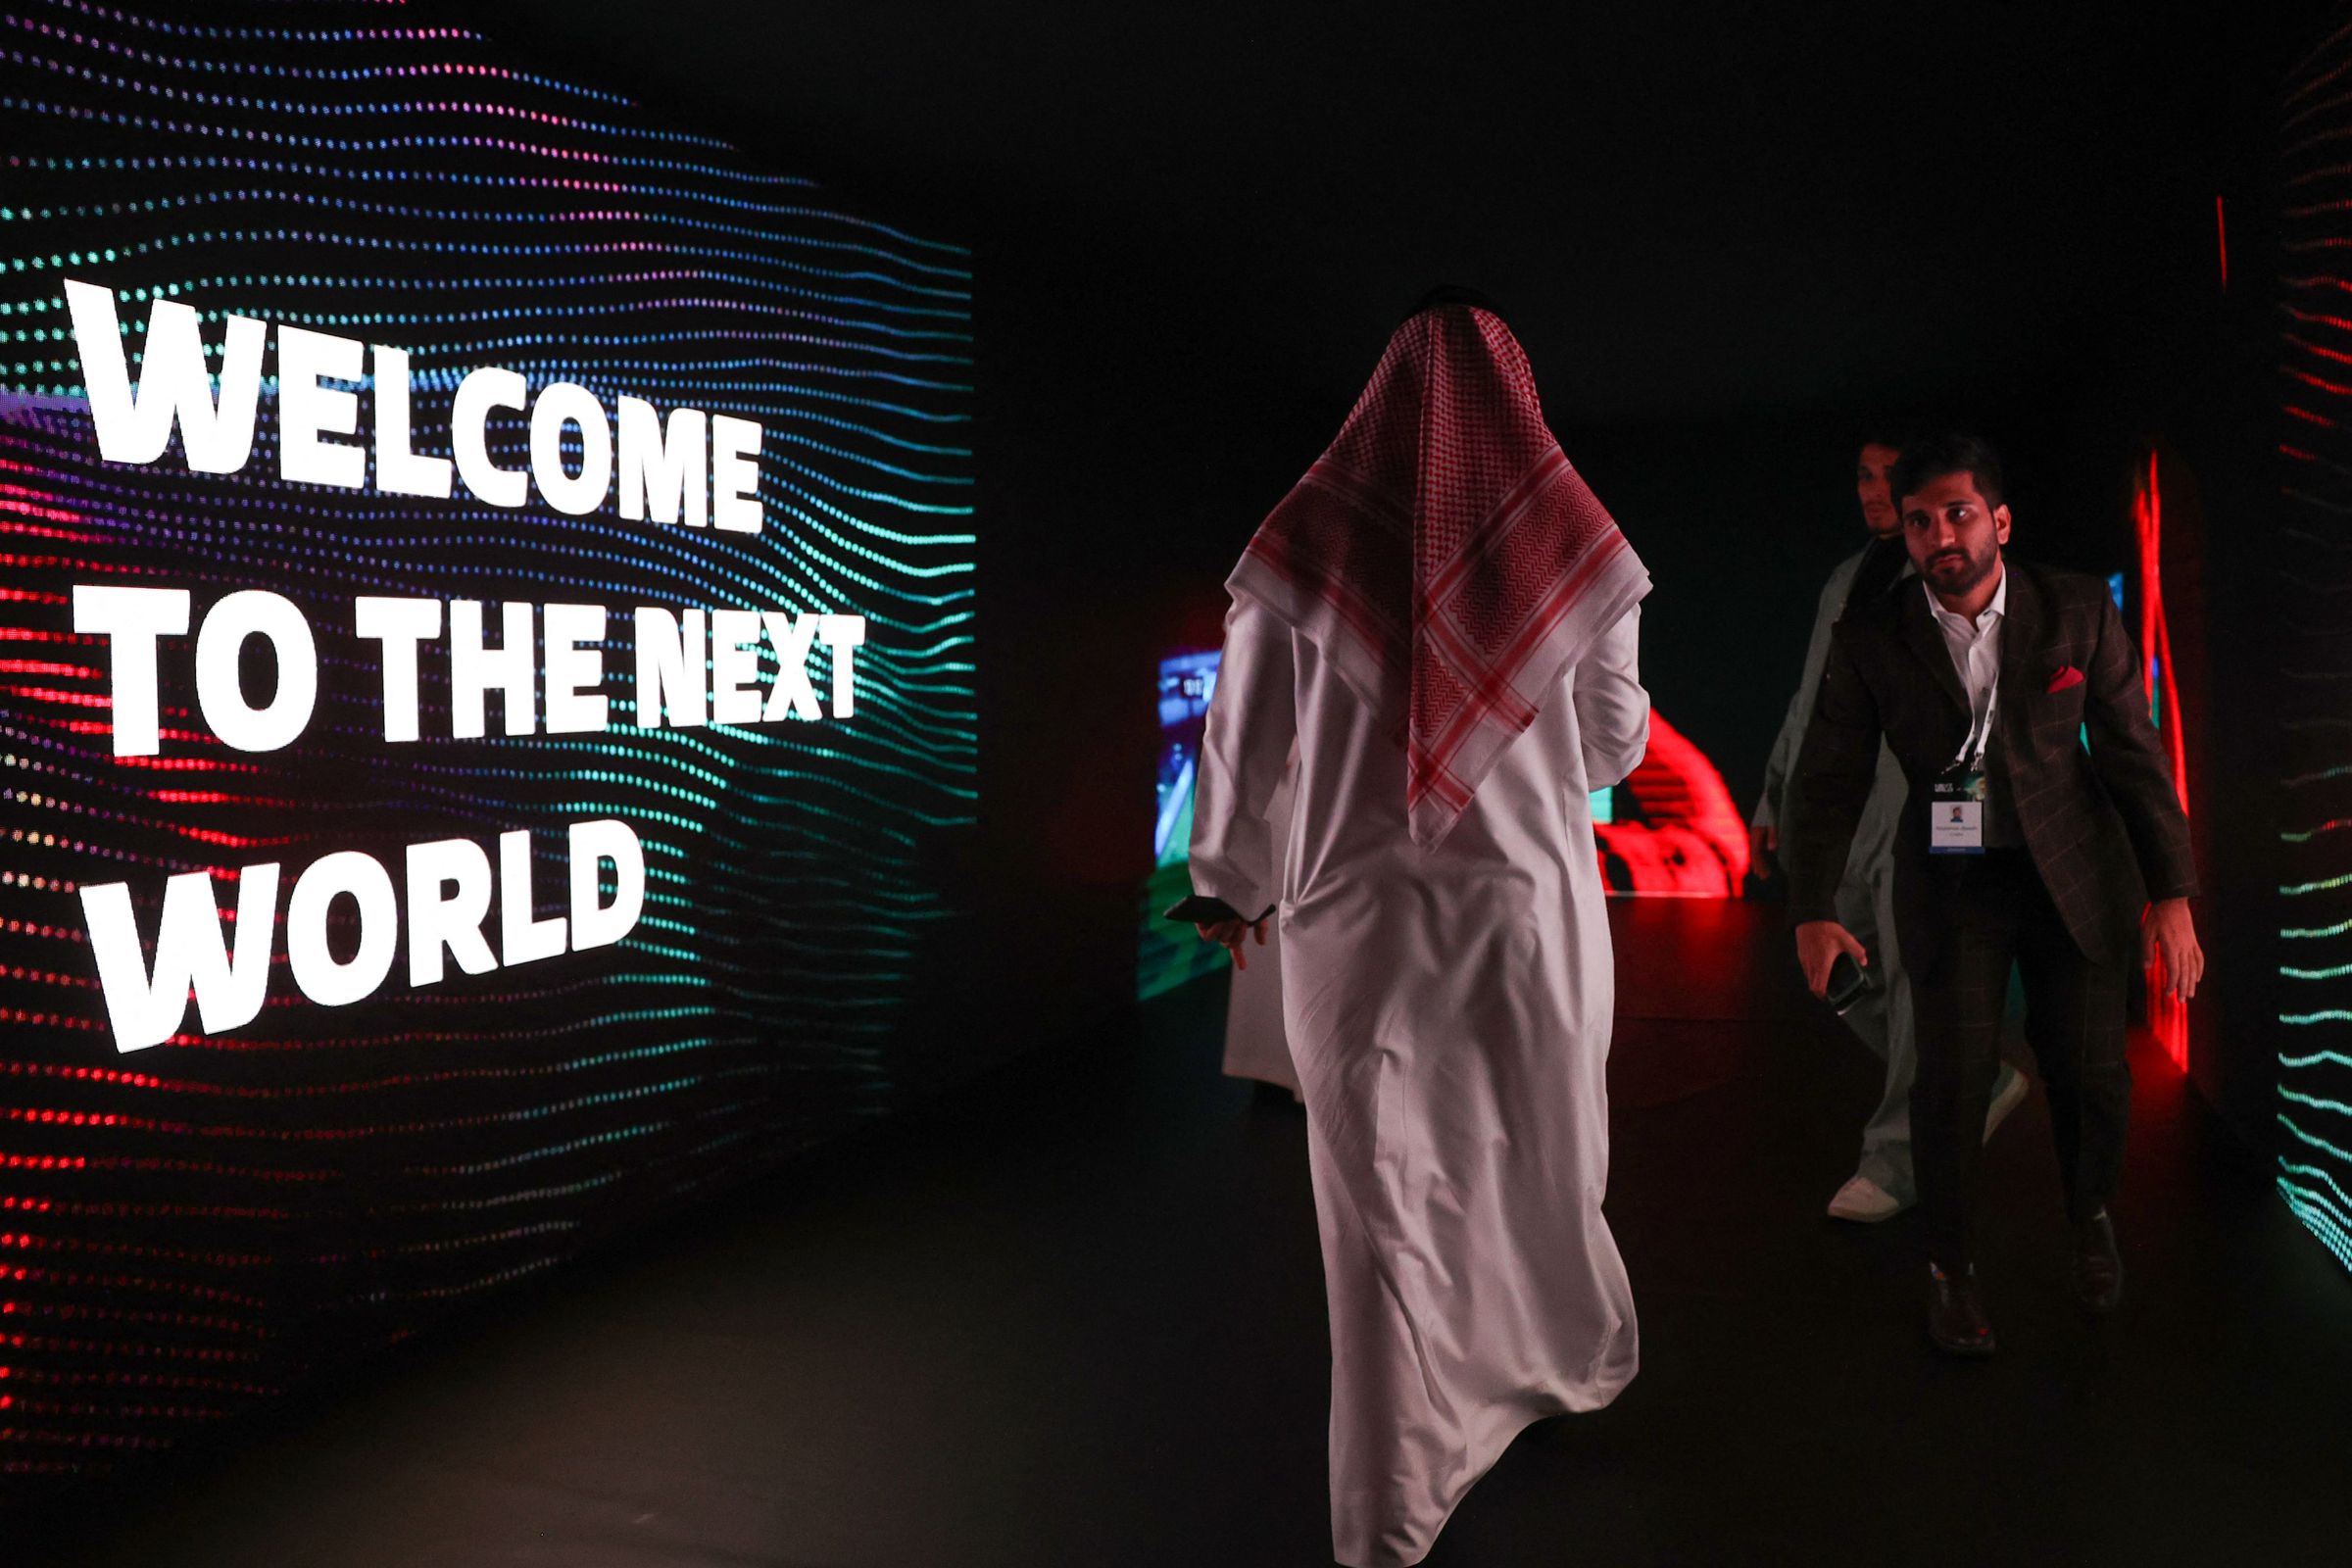 People attend the International E-Sport Gamers forum “Next World”, in the Saudi capital Riyadh, on September 7, 2022. - Much like with Formula One and professional golf, Saudi Arabia, the world’s biggest oil exporter has in recent years leveraged its immense wealth to assert itself on the eSports stage, hosting glitzy conferences and snapping up established tournament organisers.&nbsp;